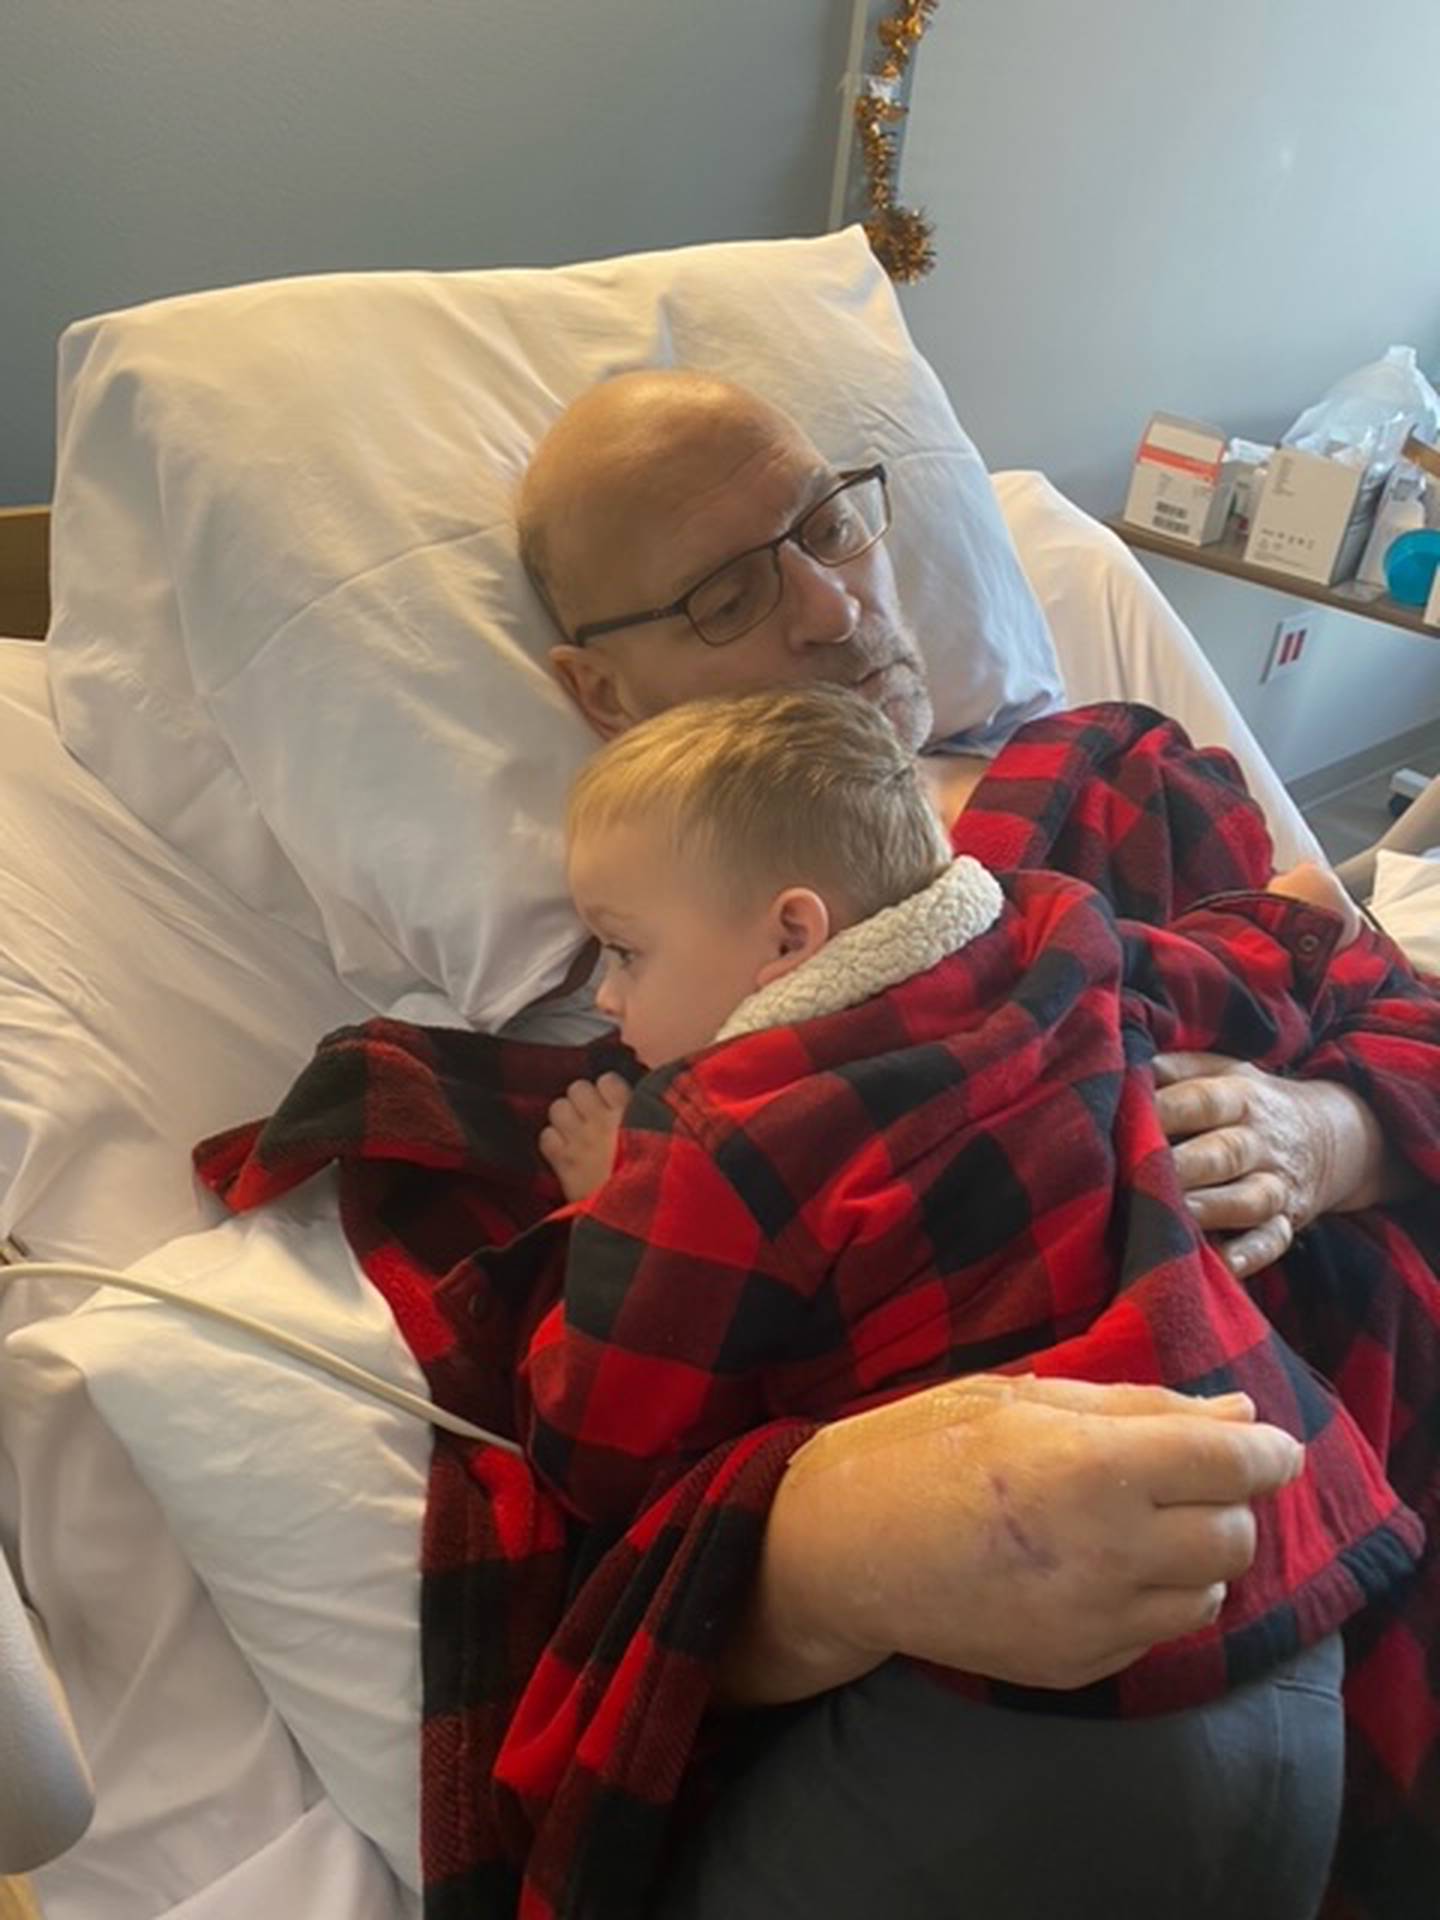 Tim Flannery, 61, of Joliet, hugs his grandson Colin, who recently visited Flannery in the hospital. Flannery was severely injured in a motorcycle crash in July 2021 and will most likely never walk, move his arms or care for any of his personal needs again. Big Hearted Bikers is hosting a fundraiser for Flannery from 4 to 8 p.m. on Friday, Nov. 19, 2021 at the Dale Athletic Club, located at 704 Moen Ave. in Rockdale.